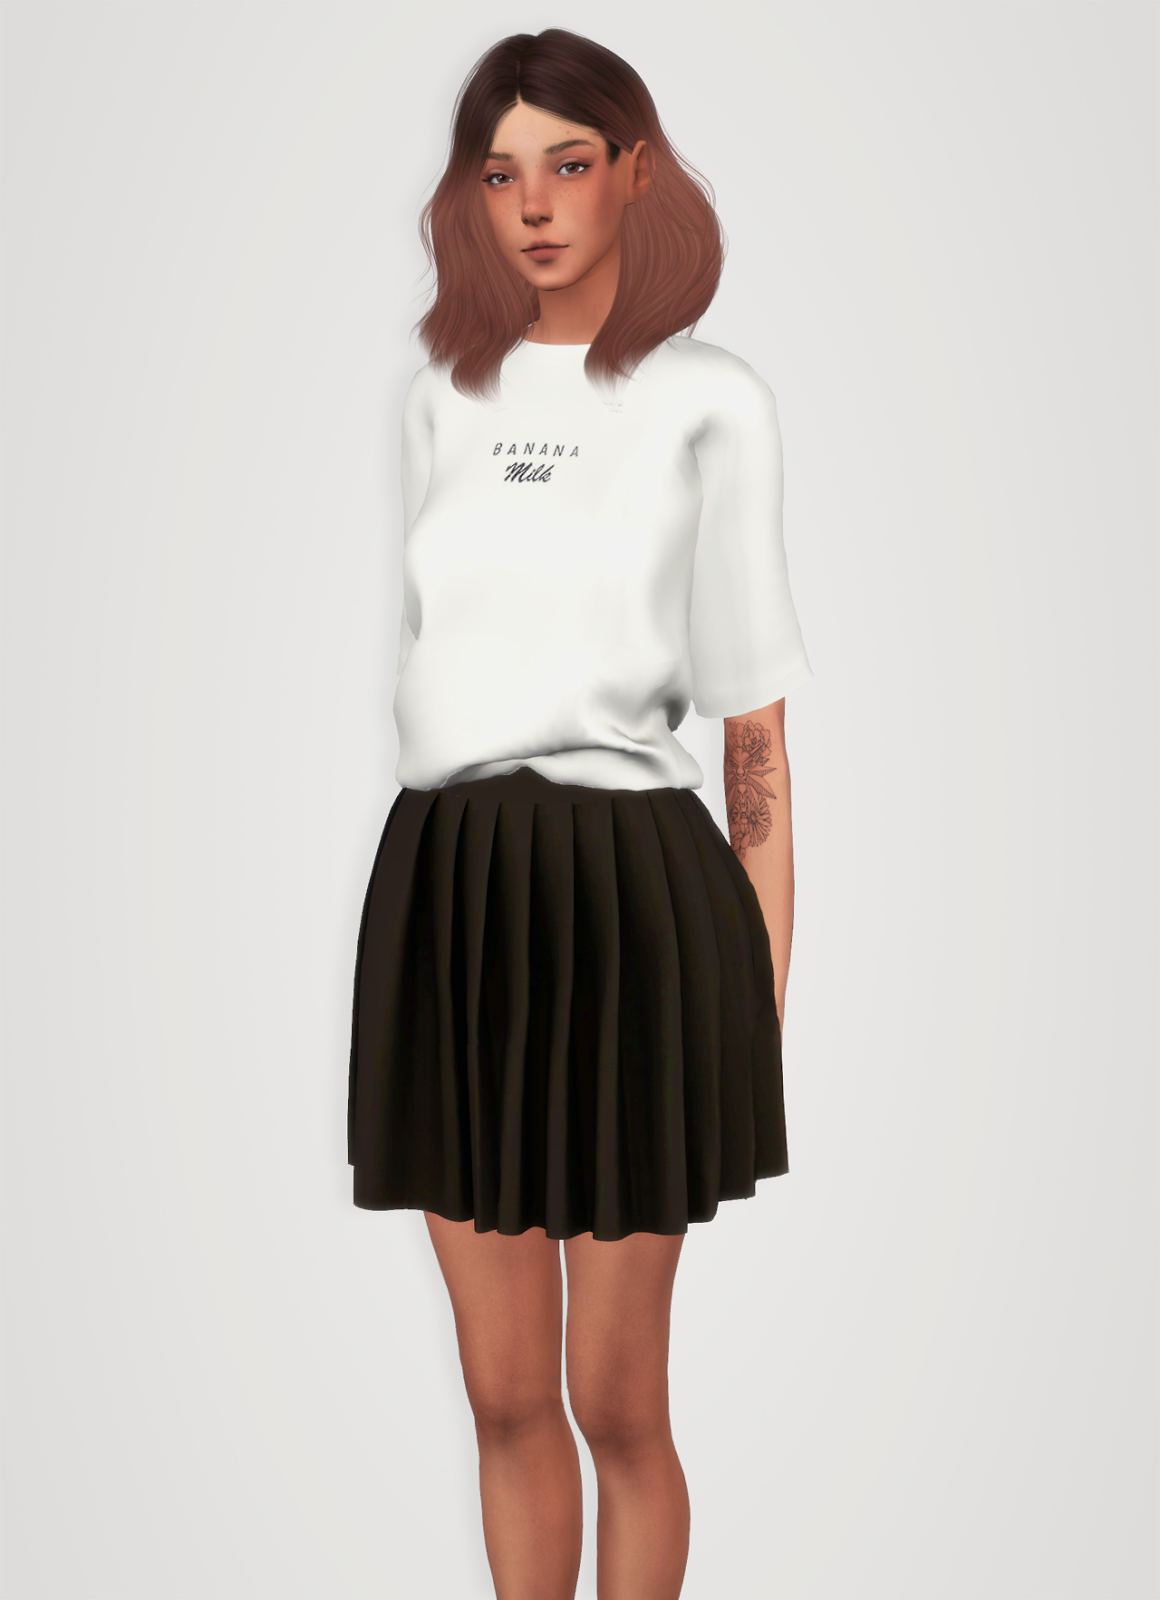 Sims 4 Straps Clothing Mod